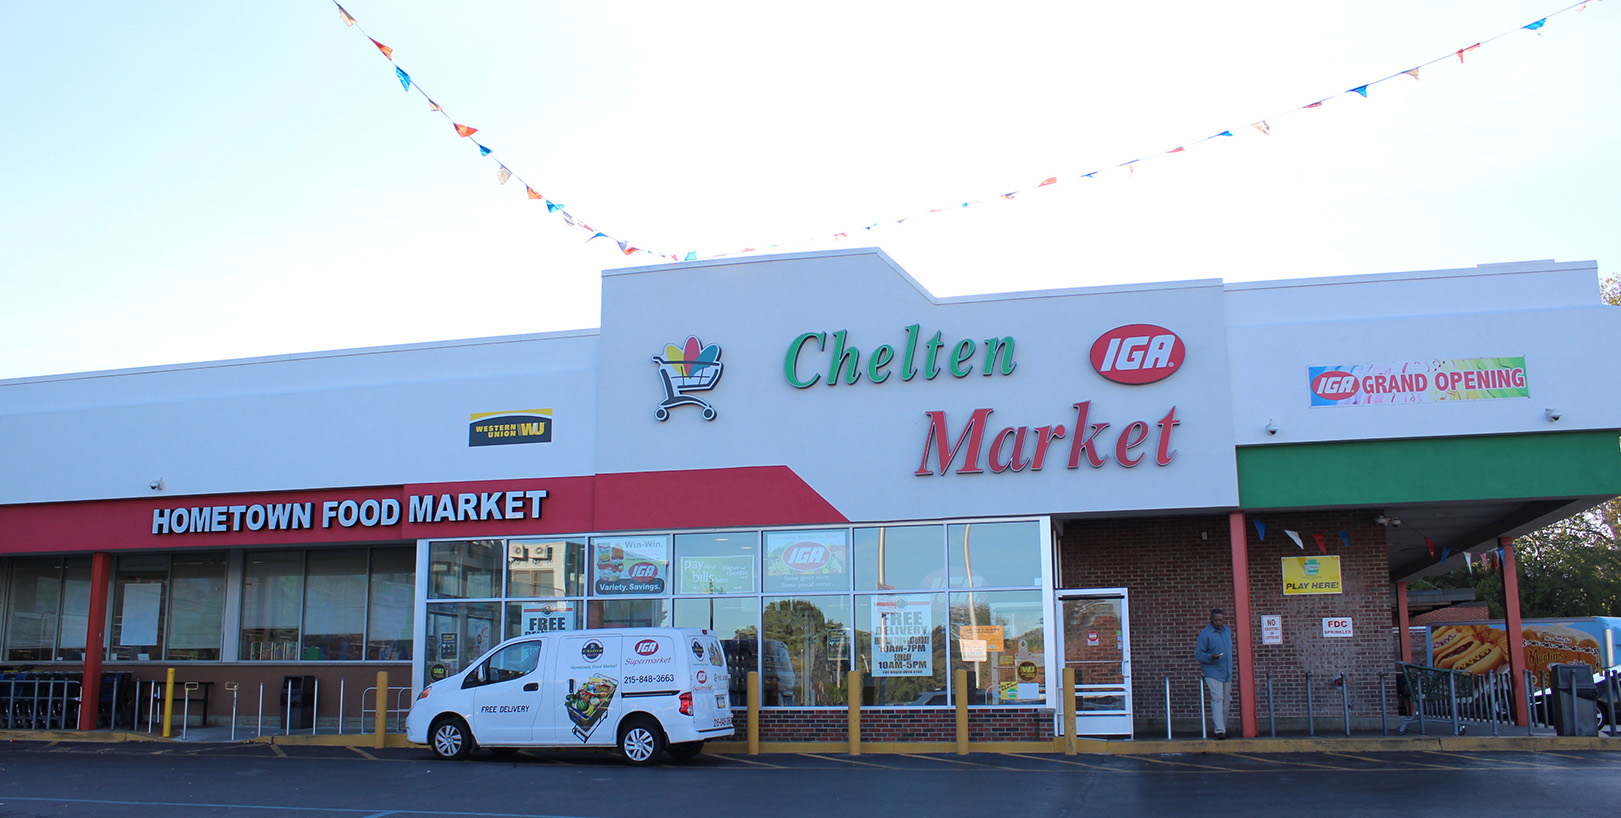 Outside view of Chelten Market in Germantown, PA